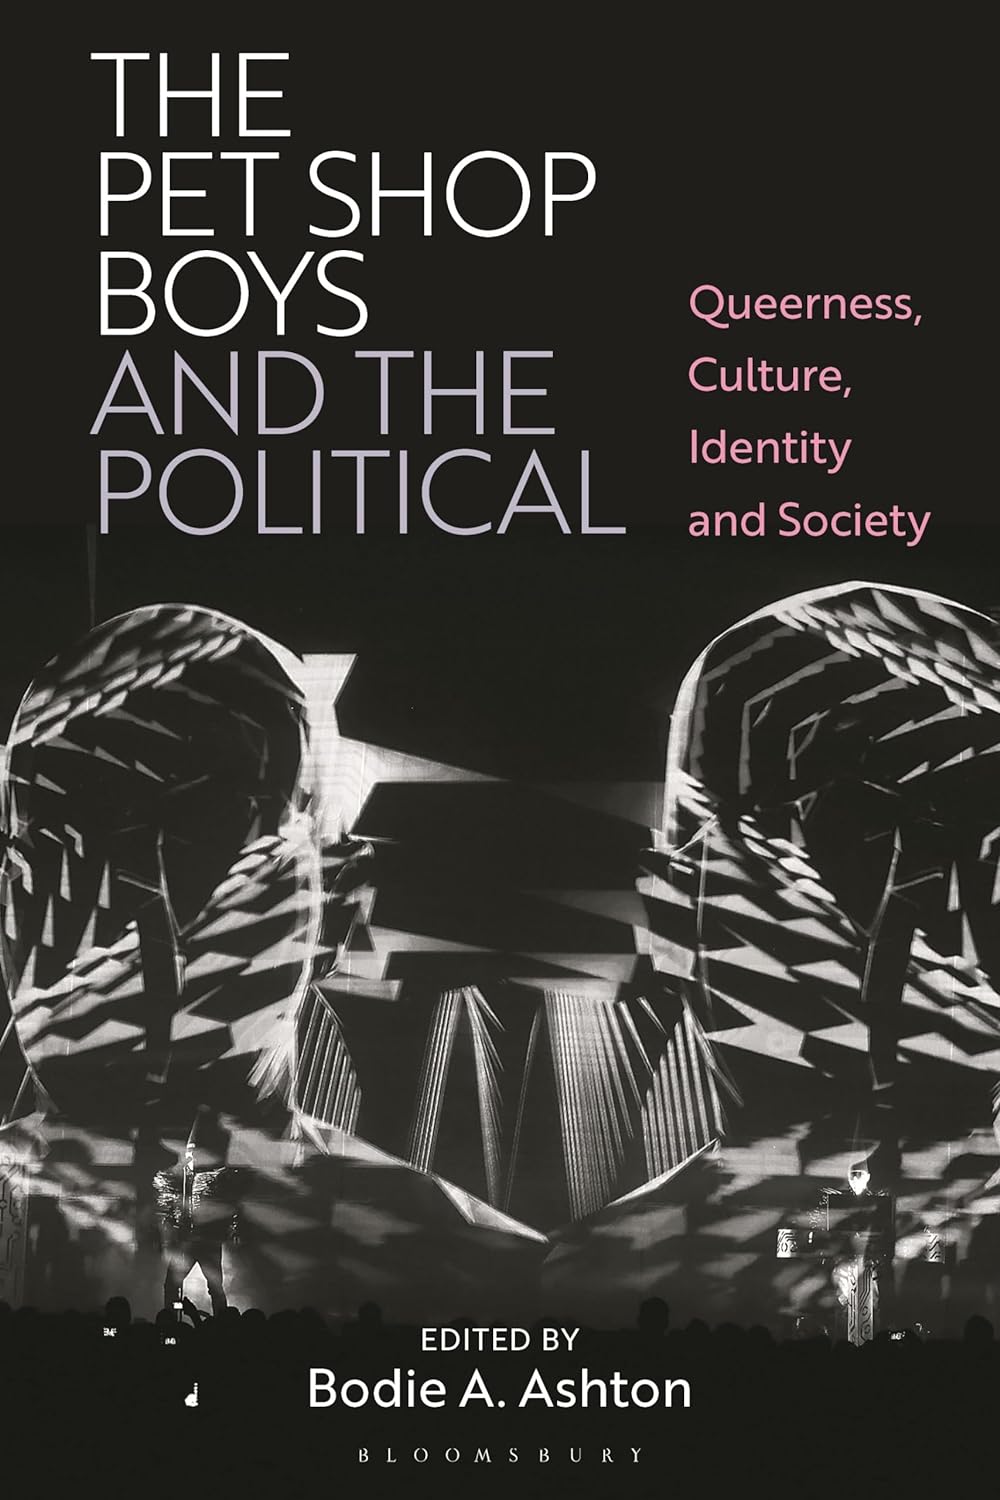 Pet Shop Boys and the Political Queerness, Culture, Identity and Society